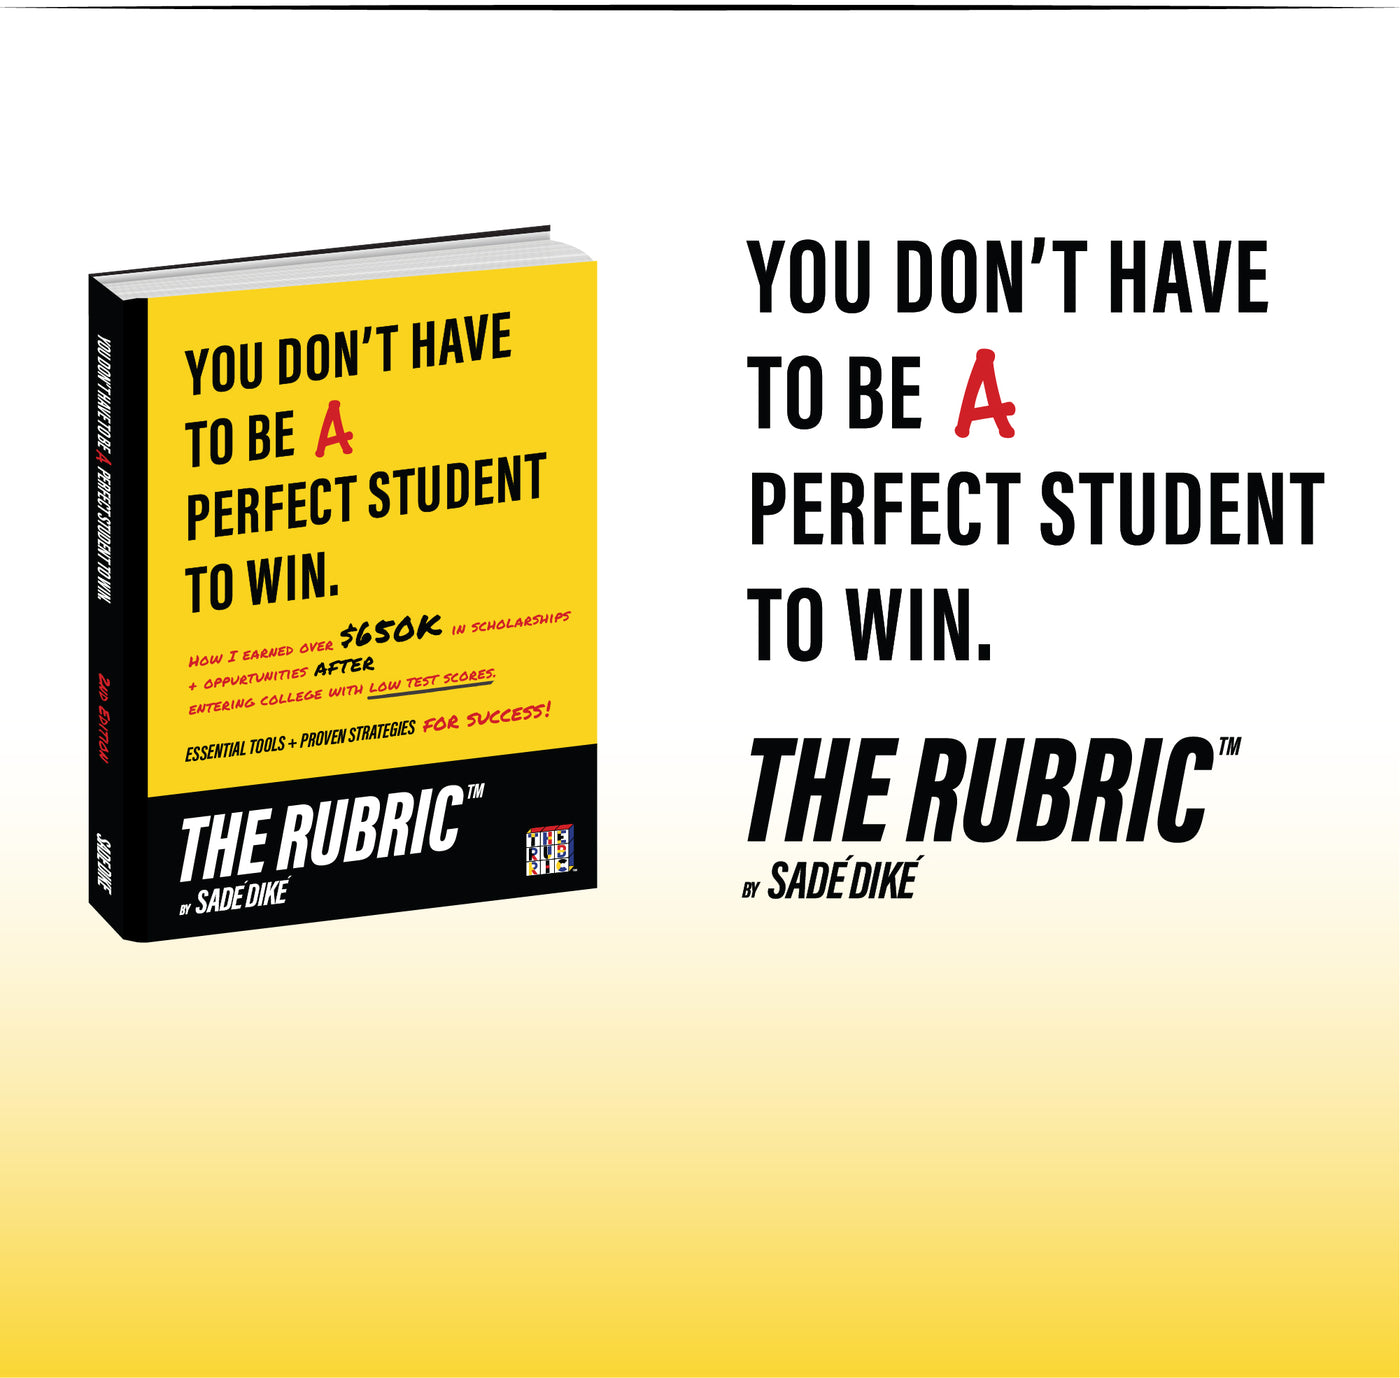 The Rubric Book is an educational and motivational how-to that guides high school and college students on their professional and academic journey. It's a proven tool packed with educational and professional development resources that every students needs.